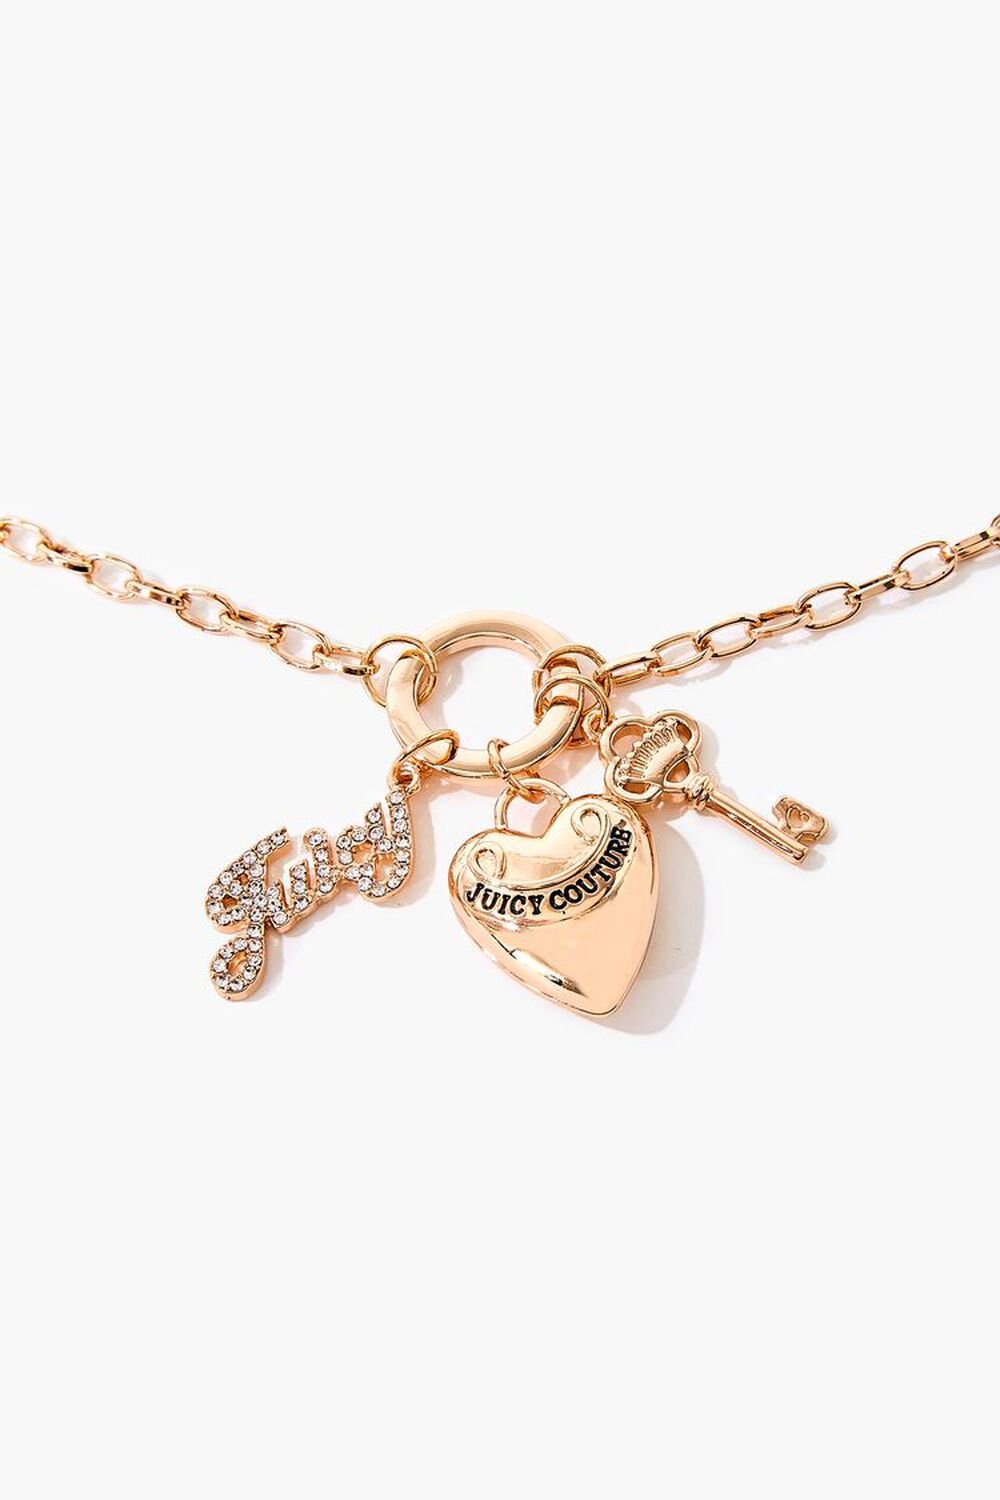 GOLD Juicy Couture Charm Necklace, image 1